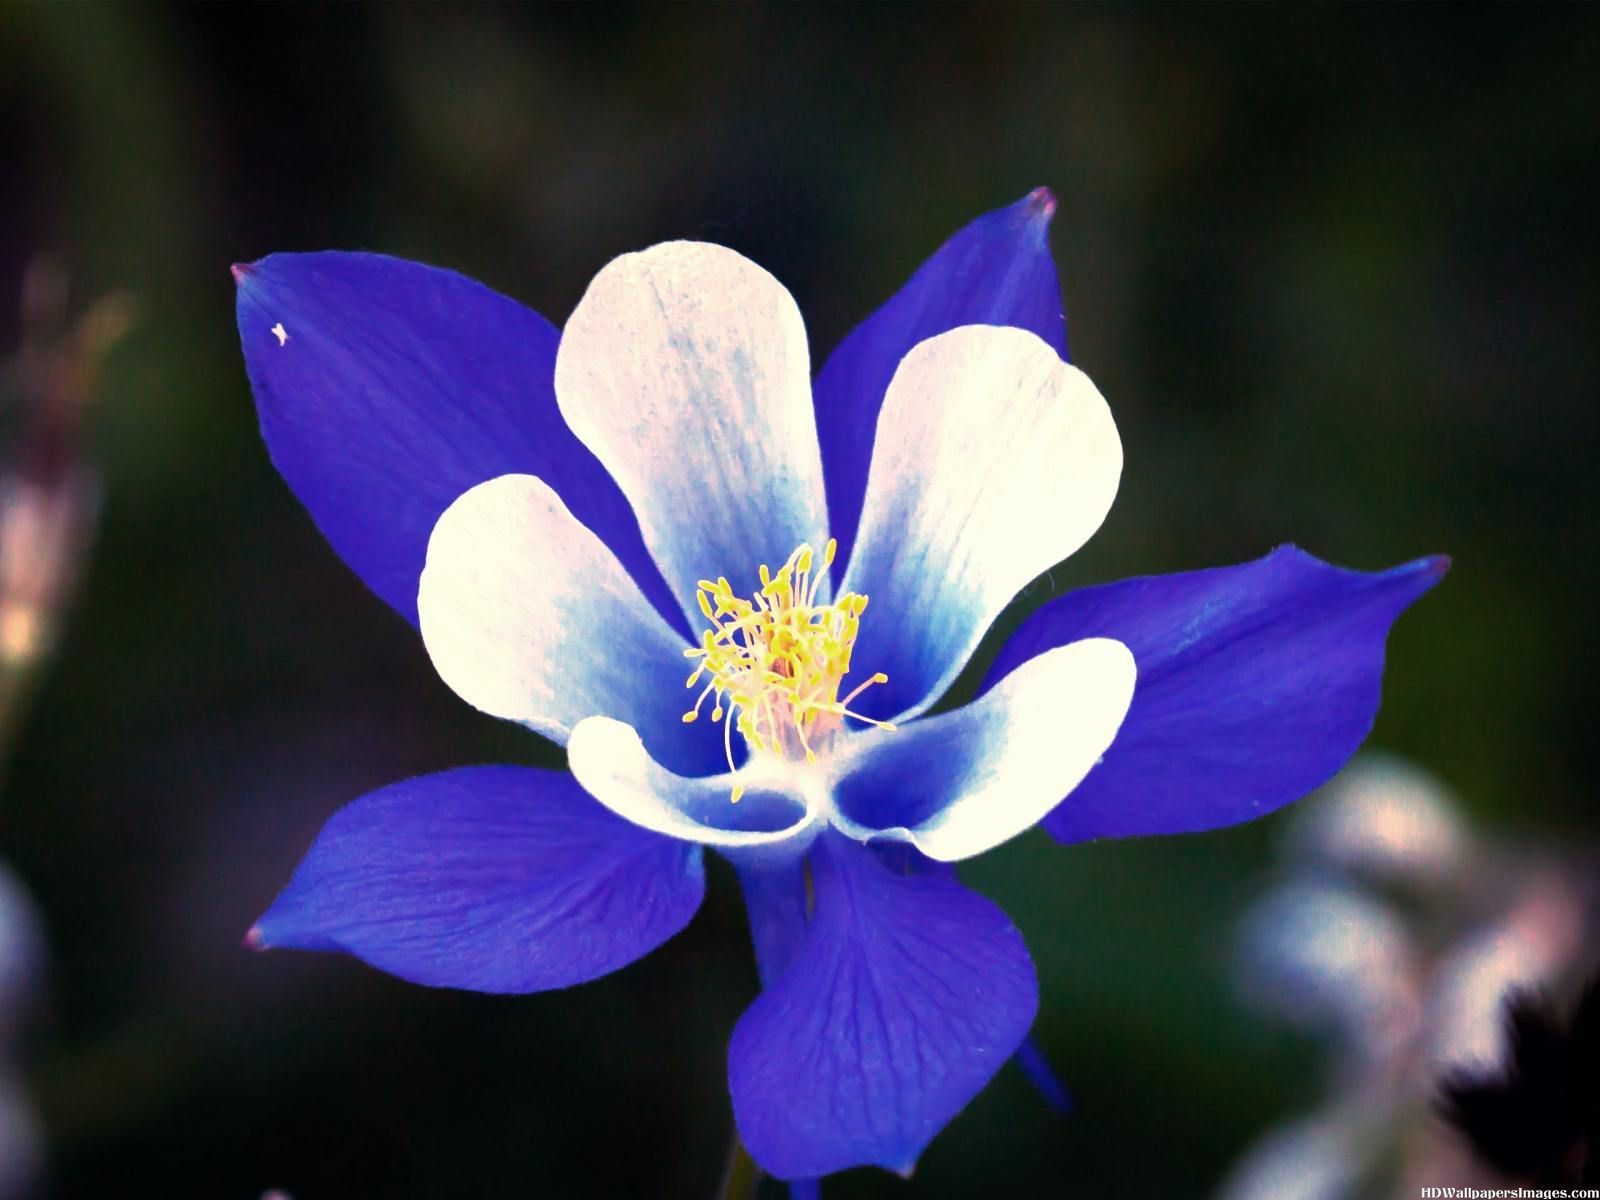 Rocky Mountain Columbine Blue Flower Images | HD Wallpapers Images ...